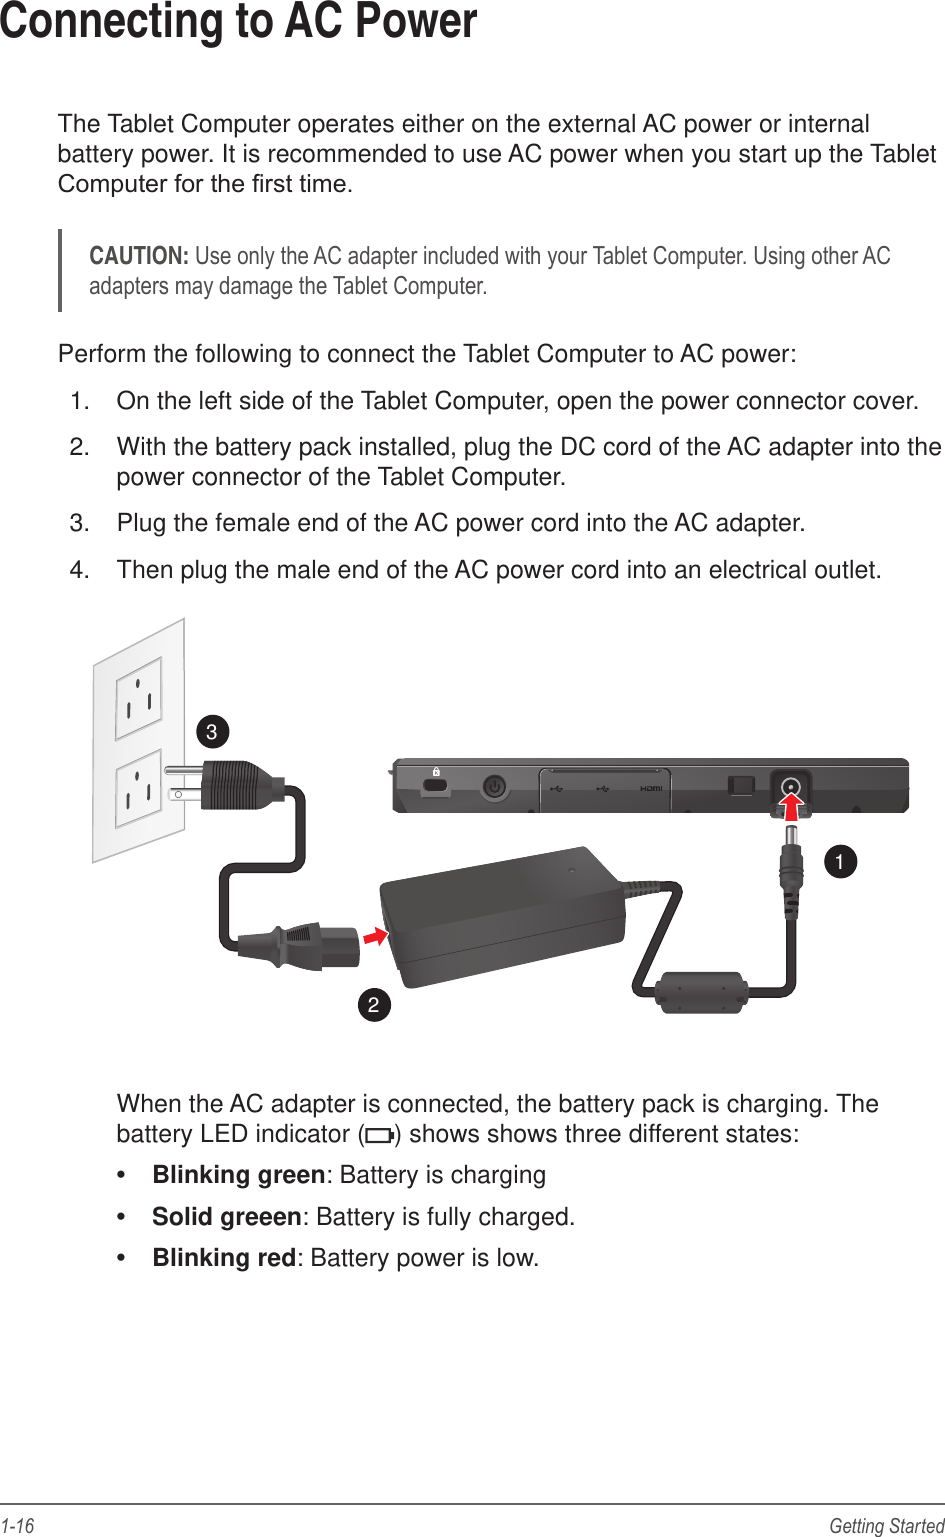 1-16 Getting StartedConnecting to AC PowerThe Tablet Computer operates either on the external AC power or internal battery power. It is recommended to use AC power when you start up the Tablet CAUTION:Perform the following to connect the Tablet Computer to AC power:1.  On the left side of the Tablet Computer, open the power connector cover.2.  With the battery pack installed, plug the DC cord of the AC adapter into the power connector of the Tablet Computer.3.  Plug the female end of the AC power cord into the AC adapter.4.  Then plug the male end of the AC power cord into an electrical outlet.123When the AC adapter is connected, the battery pack is charging. The battery LED indicator ( ) shows shows three different states:  Blinking green: Battery is charging Solid greeen: Battery is fully charged. Blinking red: Battery power is low.